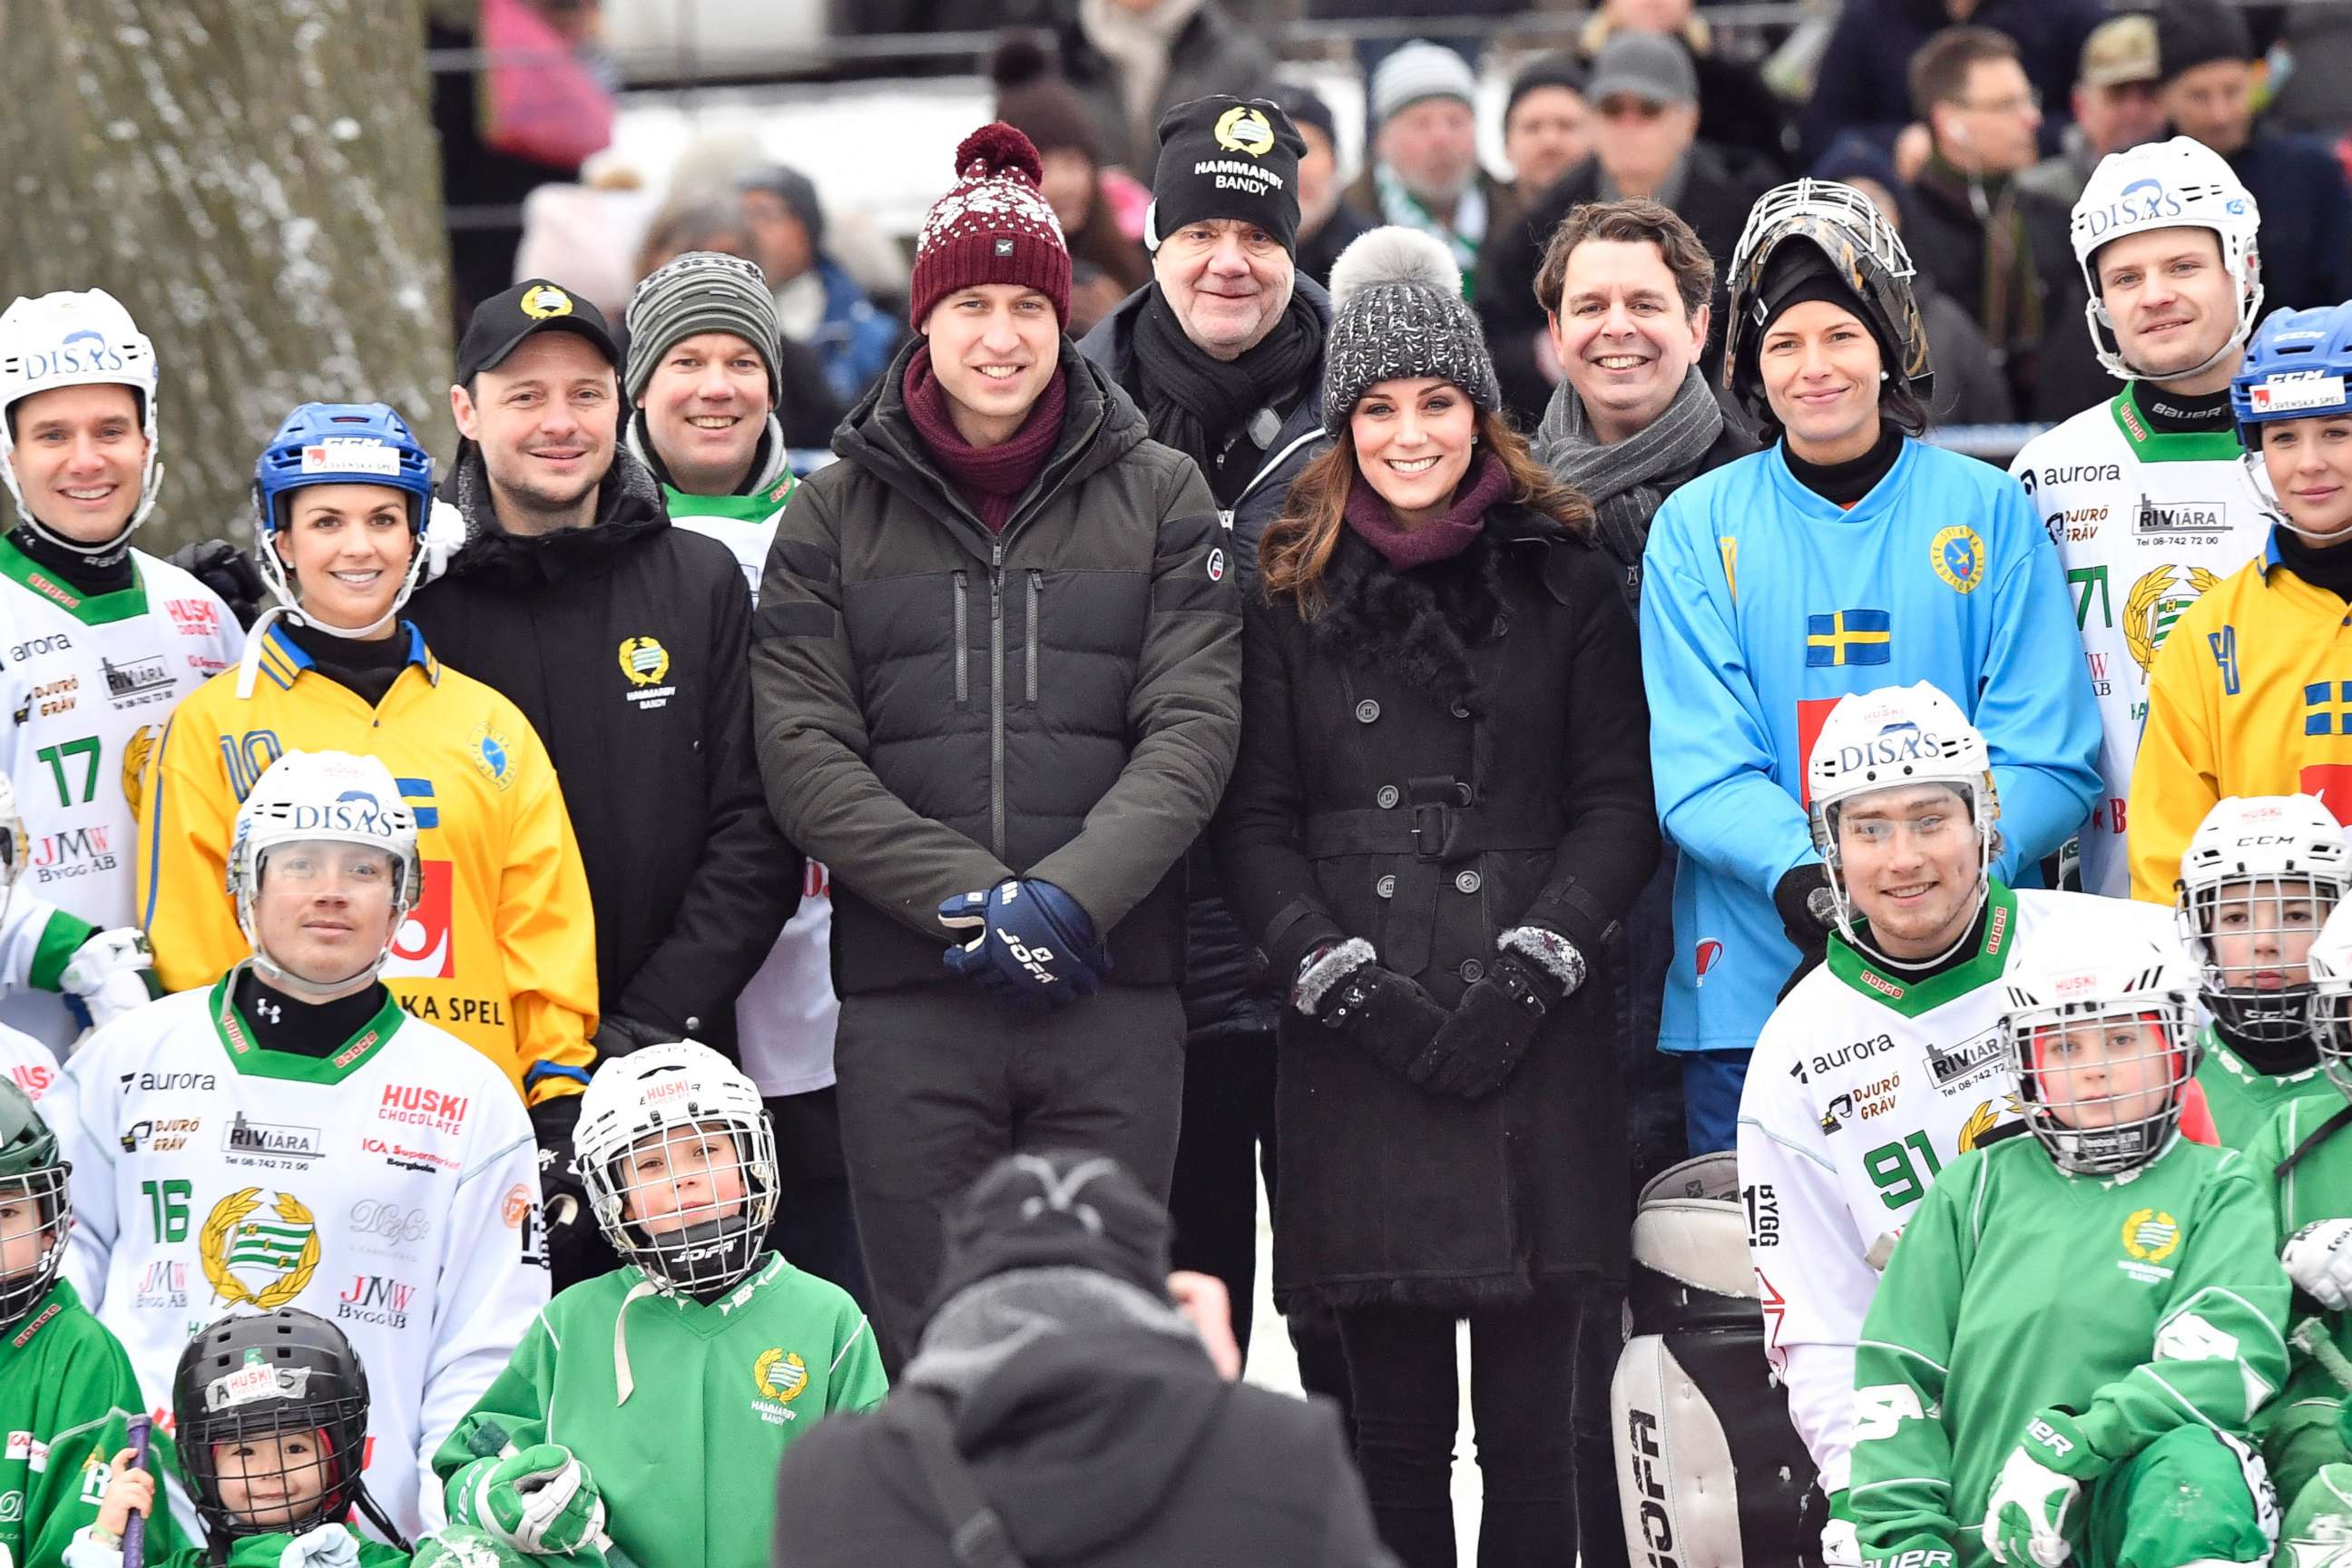 PHOTO: Britain's Prince William and Kate, Duchess of Cambridge pose with young members of the Hammarby bandy sports club in Stockholm, Jan. 30, 2018, during their 4-day visit to Sweden and Norway. 